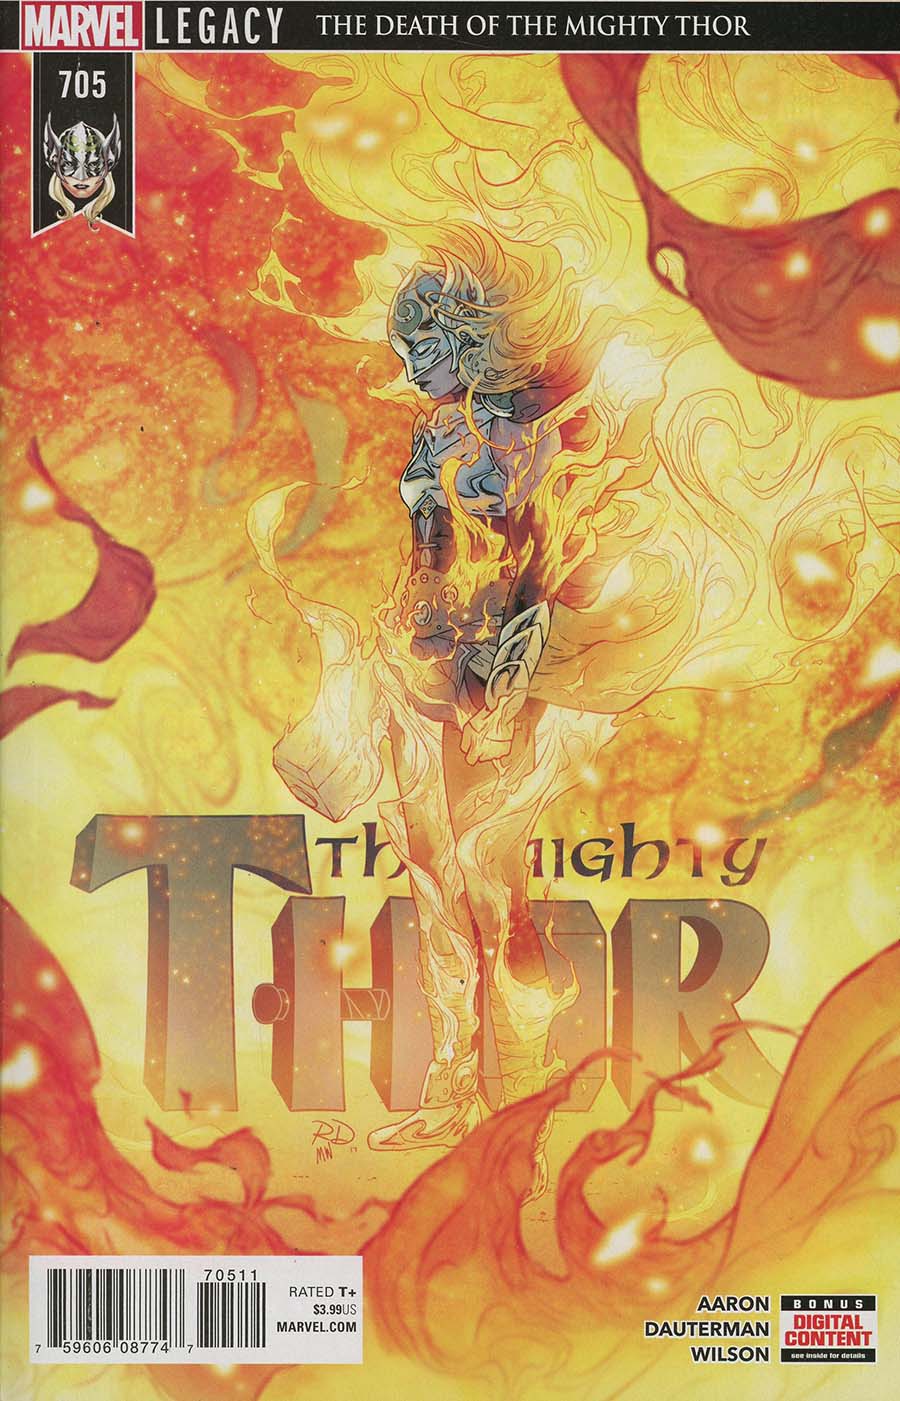 Mighty Thor Vol 2 #705 Cover A Regular Russell Dauterman Cover (Marvel Legacy Tie-In)